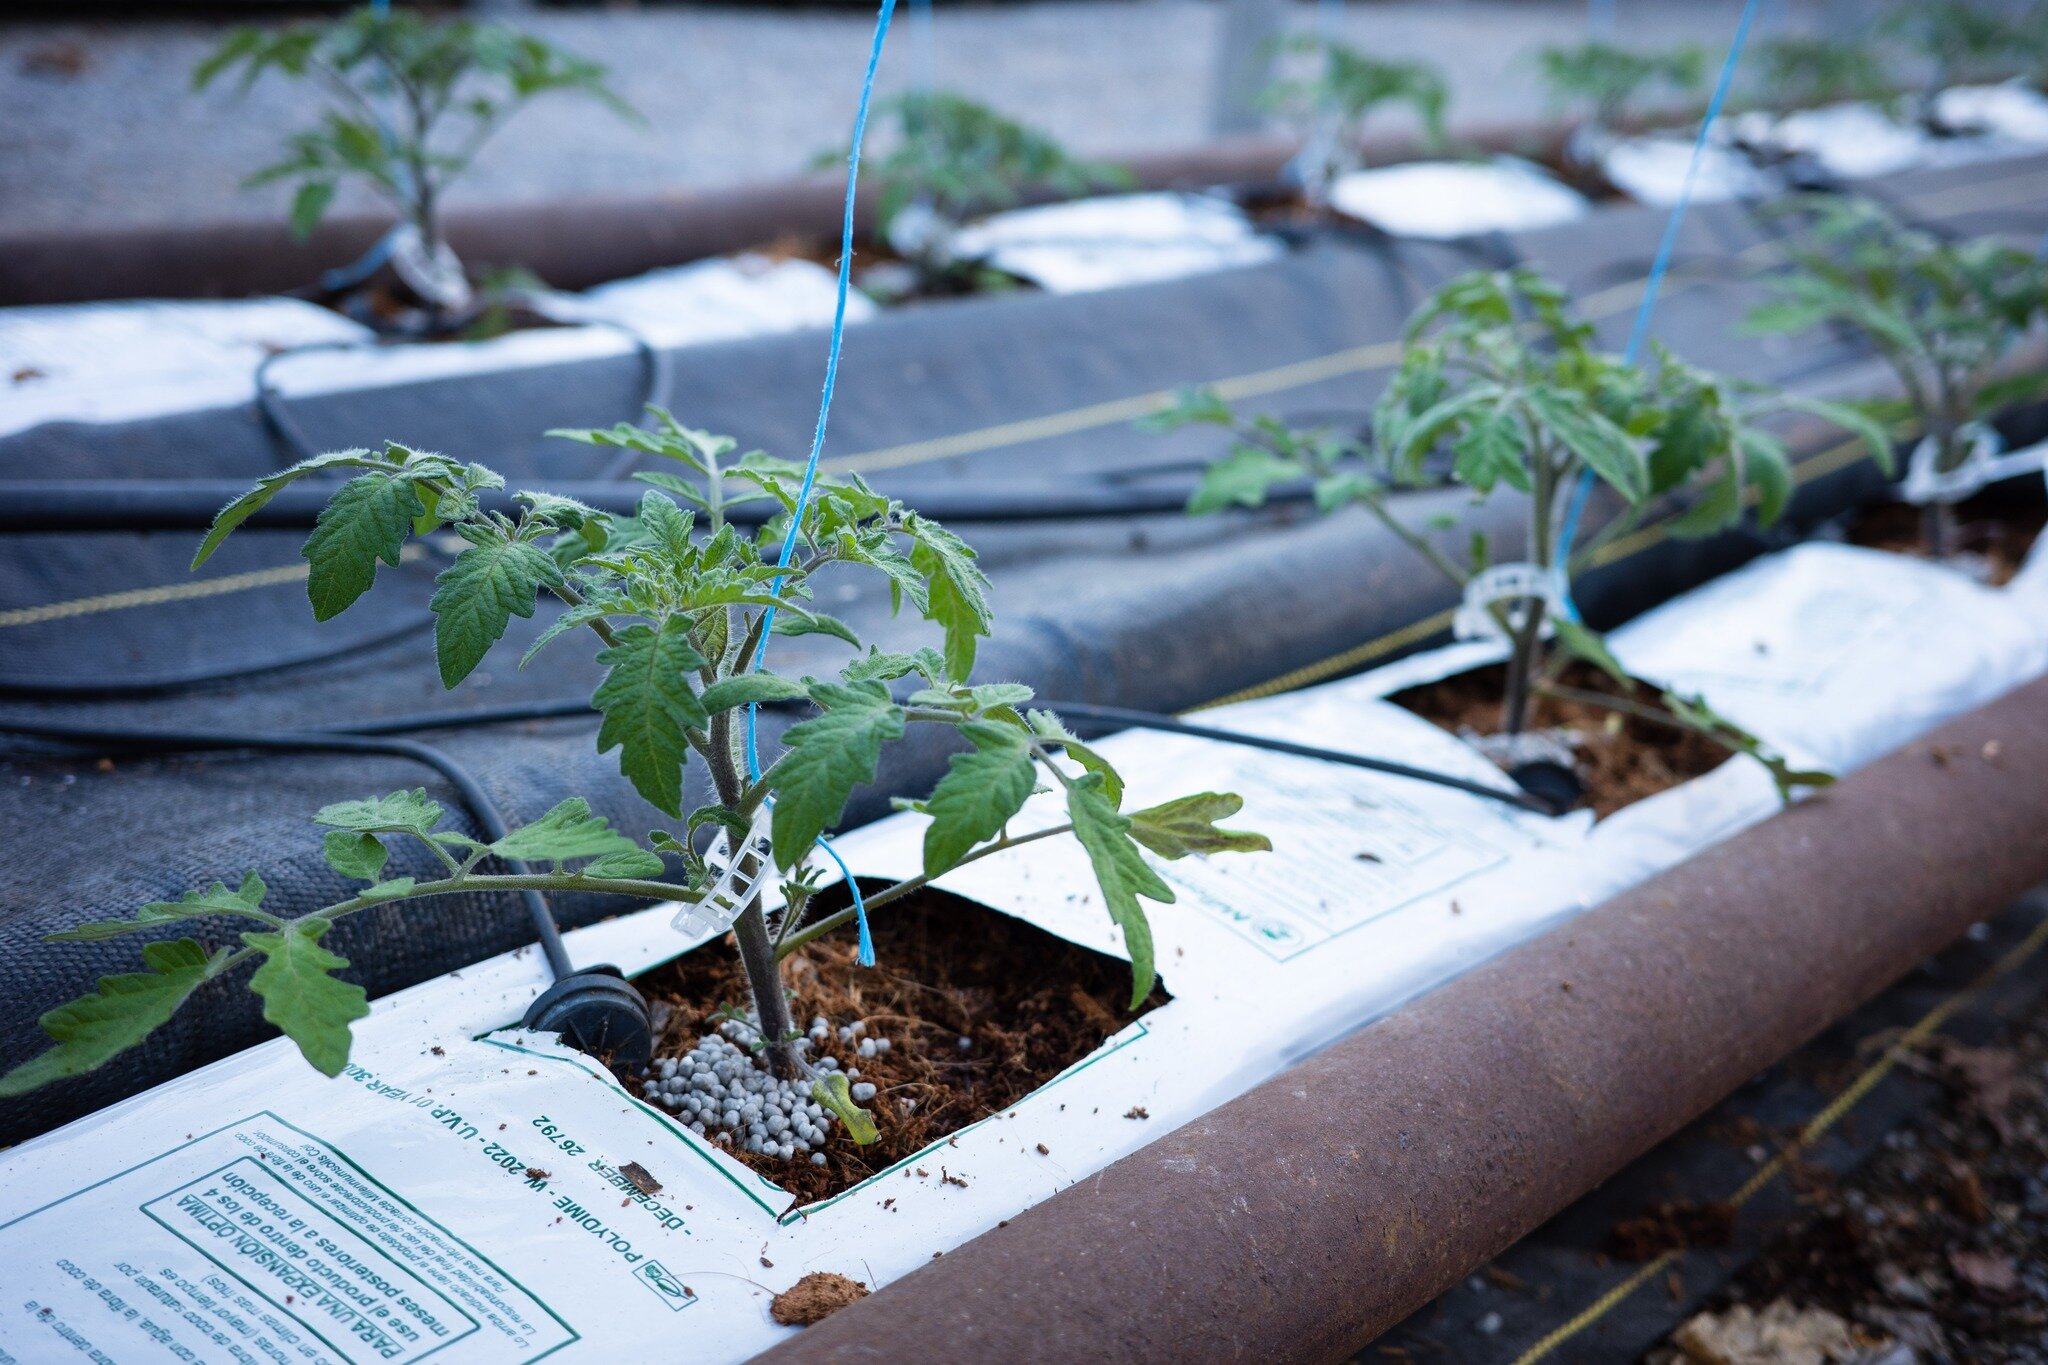 Our u-pick tomato greenhouse is starting to take shape! These little guys will be huge before we know it - fresh tomato season can never come soon enough!